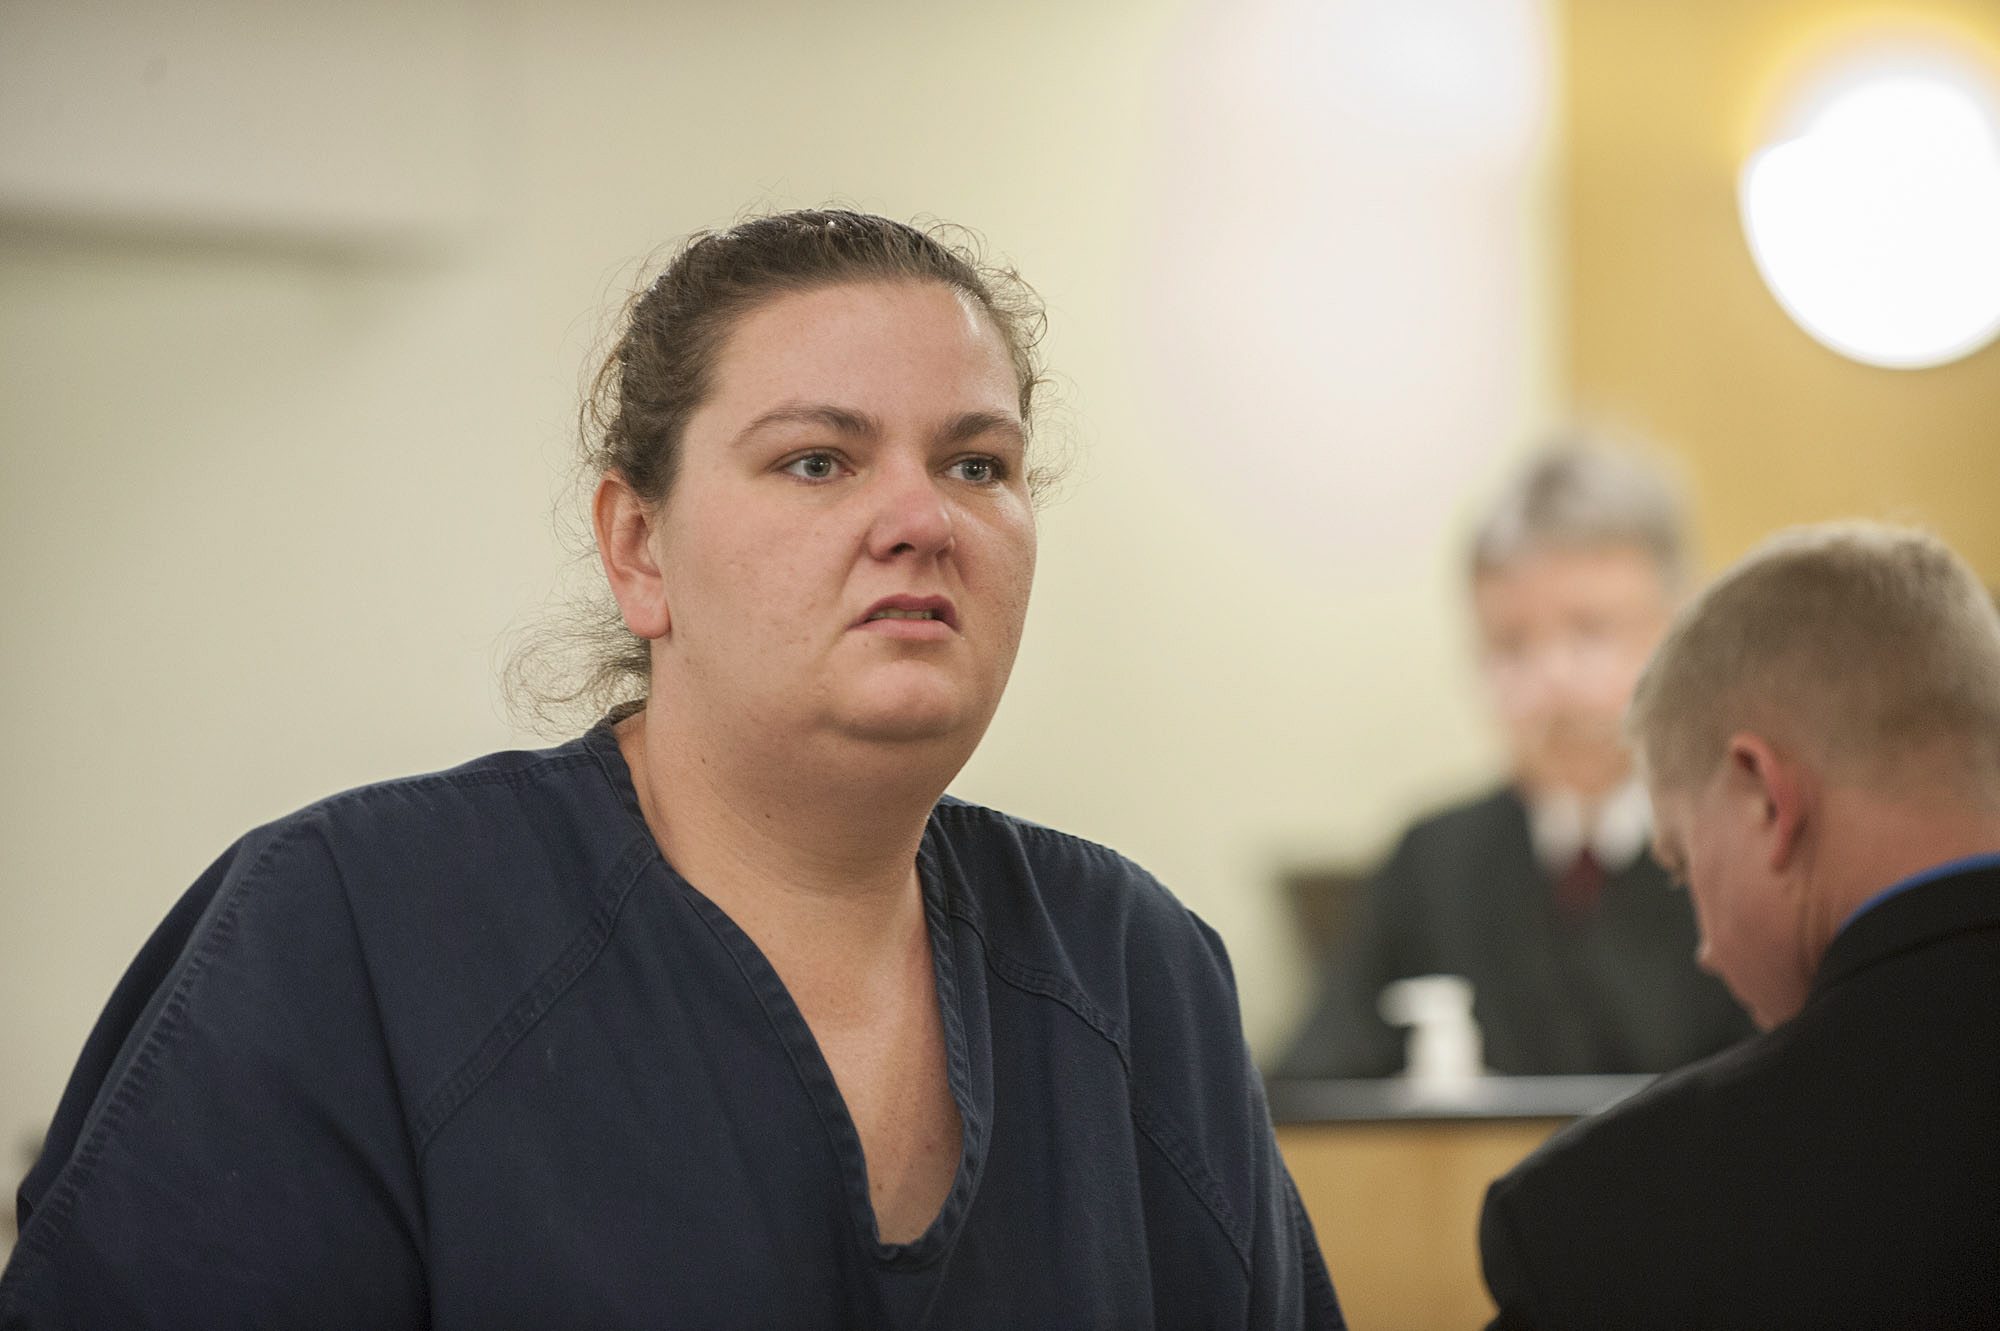 Stacey Wielenbeck of Vancouver makes a first appearance Monday in Clark County Superior Court after allegedly leading multiple law enforcement agencies on a car chase from Portland's Hayden Island that ended in a crash on Northeast Fourth Plain Boulevard on Saturday night.